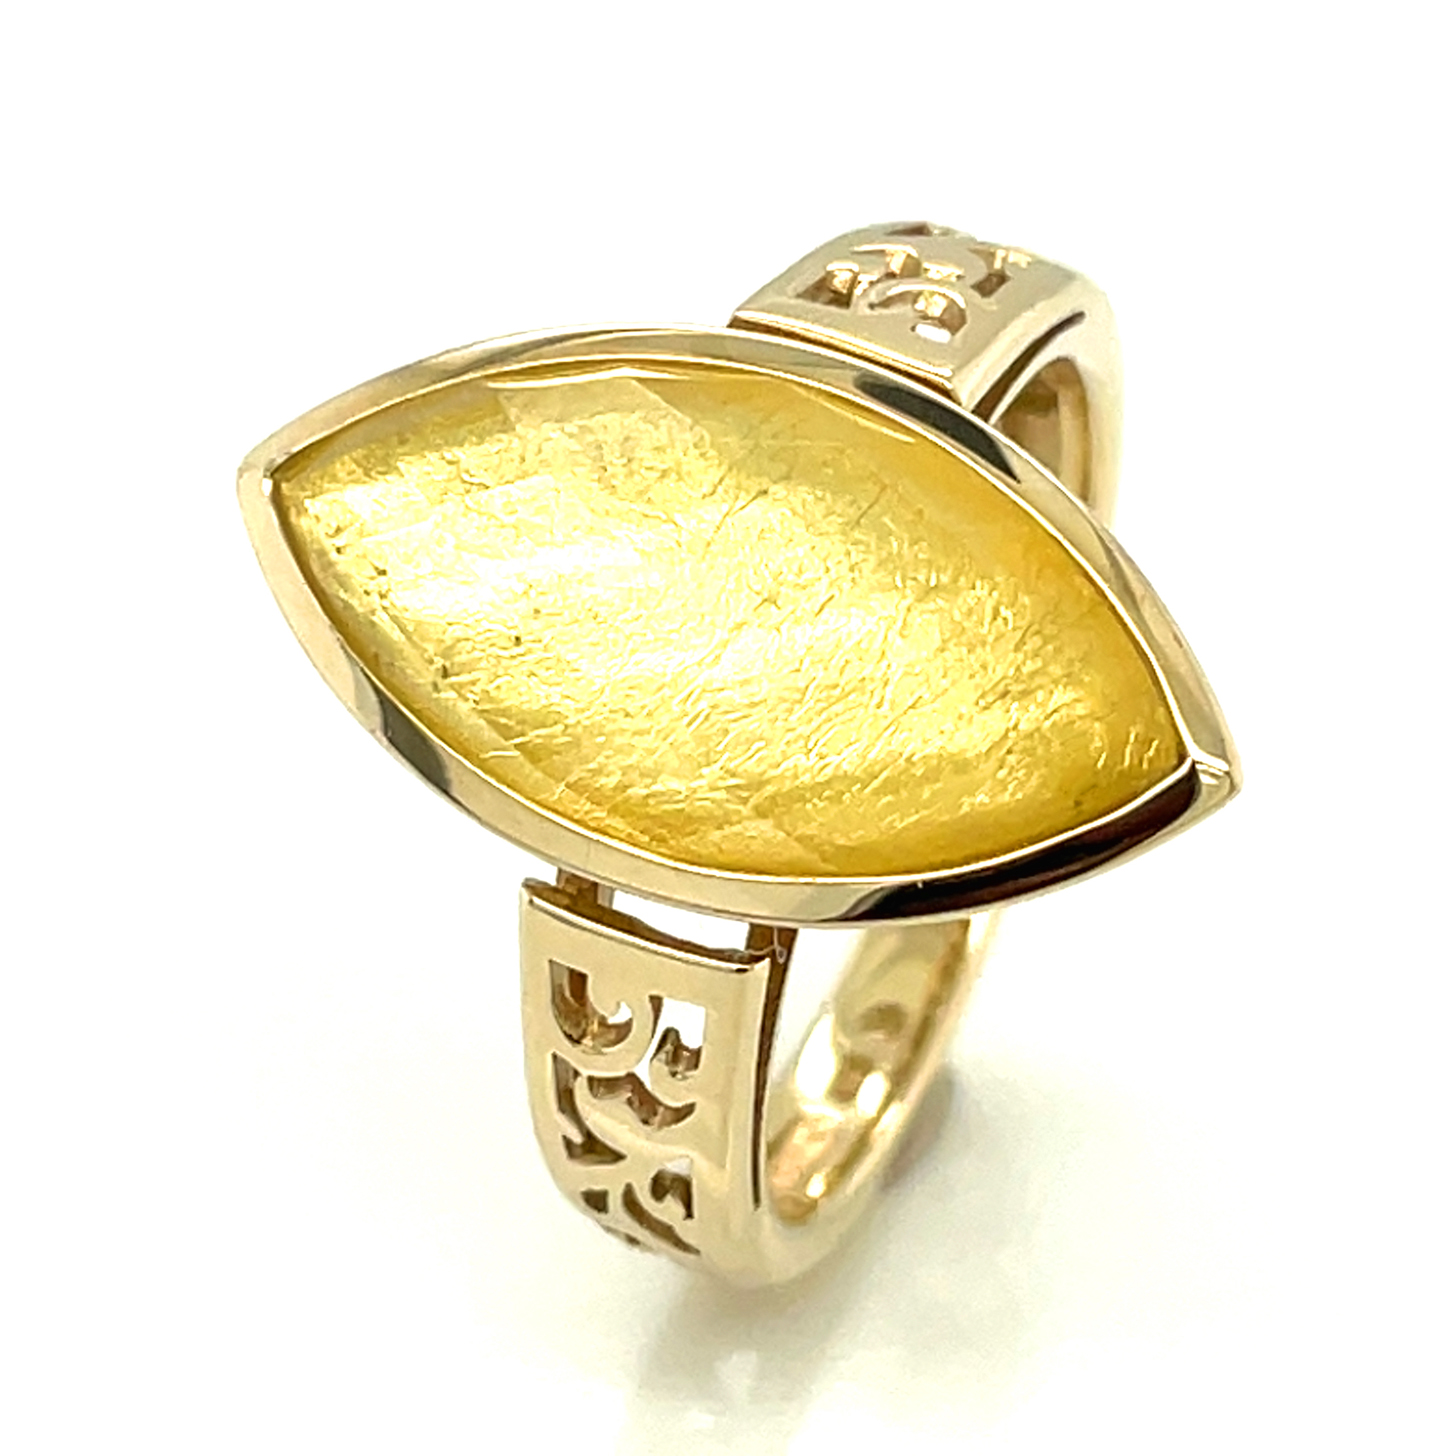 Bergkristall/Blattgold, Navette Cabochon , ca. 4,10 ct. Edelstein Ring Gelbgold 375/000 Sogni d´oro Classic